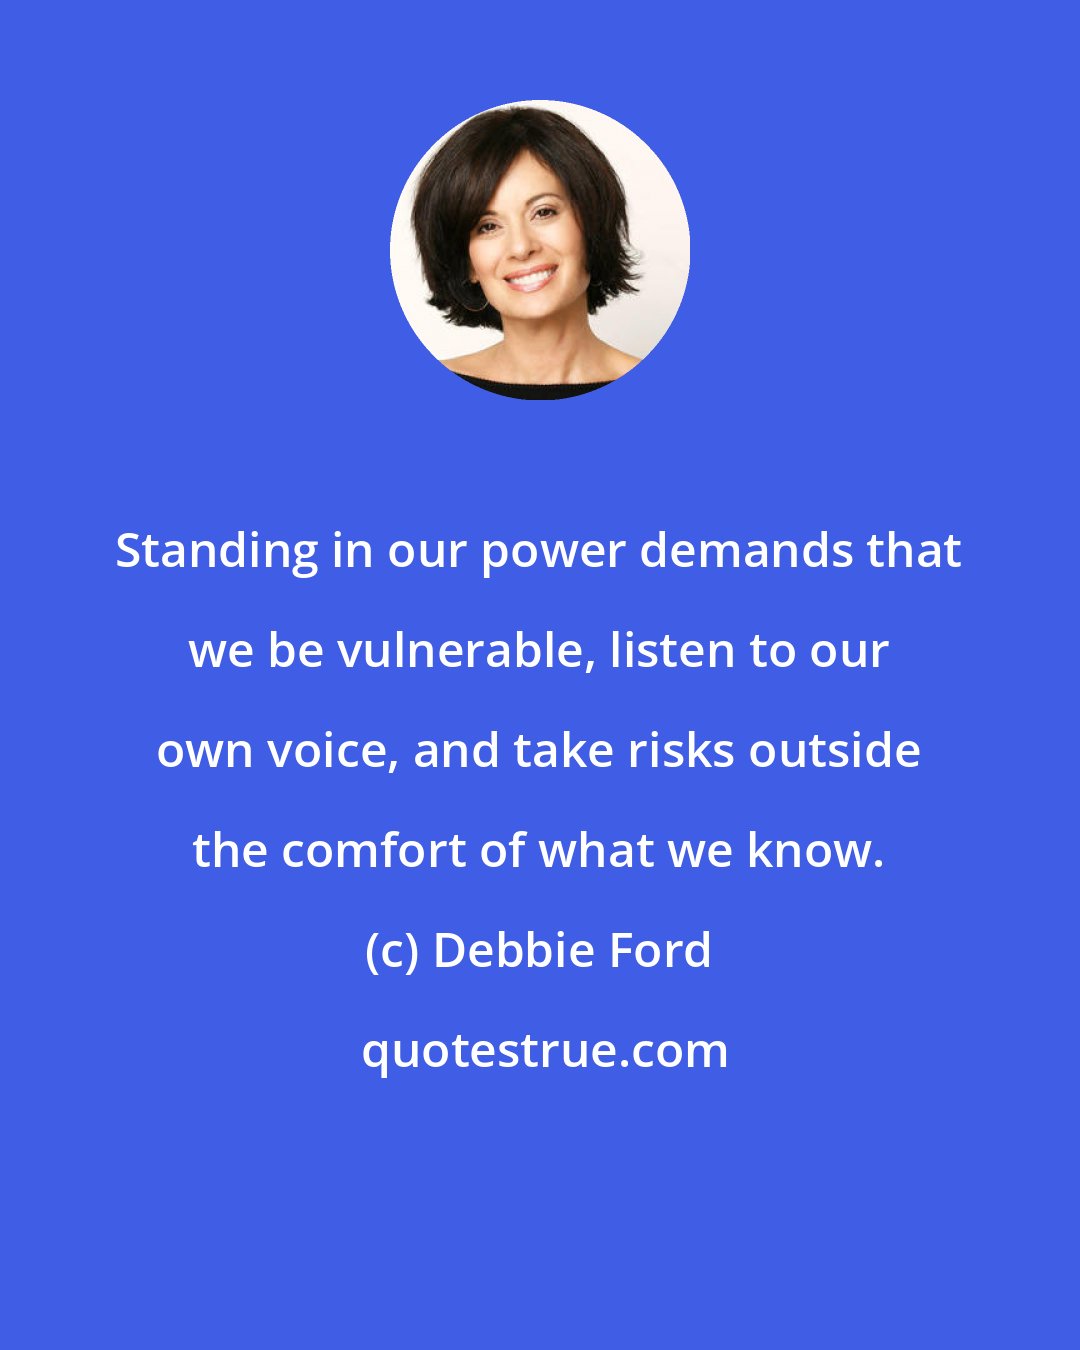 Debbie Ford: Standing in our power demands that we be vulnerable, listen to our own voice, and take risks outside the comfort of what we know.